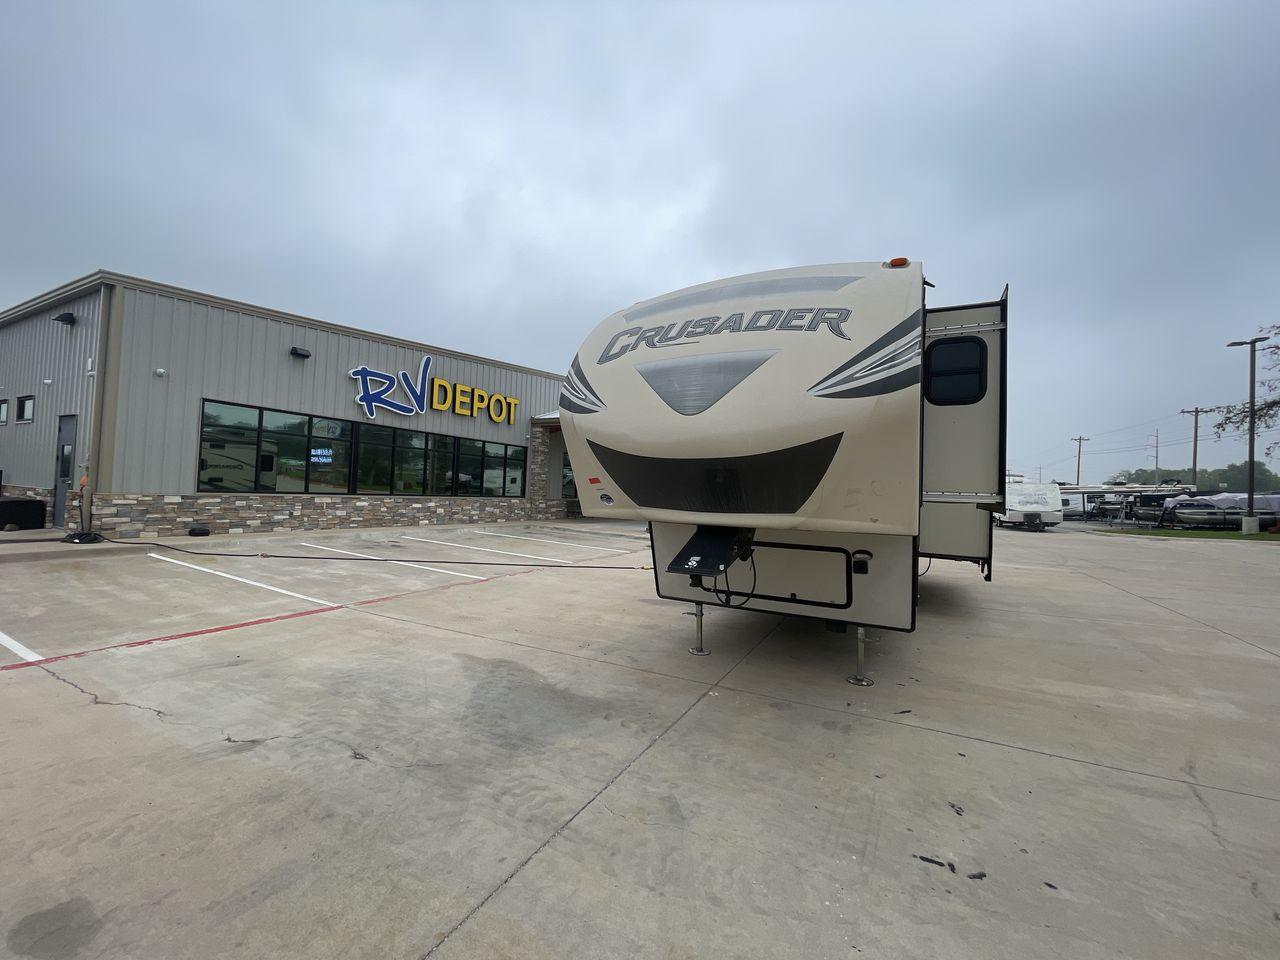 2016 TAN FOREST RIVER CRUSADER 315 (5ZT3CSXB8GG) , Length: 33.92 ft. | Dry Weight: 9,926 lbs. | Gross Weight: 12,353 lbs. | Slides: 3 transmission, located at 4319 N Main St, Cleburne, TX, 76033, (817) 678-5133, 32.385960, -97.391212 - This 2016 Forest River Crusader 315 fifth wheel has dimensions of 33.92 ft in length, 8 ft in width, and 12.5 ft in height. It has a dry weight of 9,926 lbs, a payload capacity of 2,427 lbs. The GVWR is 12,353 lbs, and the hitch weight is 1,953 lbs. This fifth wheel has an aluminum body material and - Photo #0